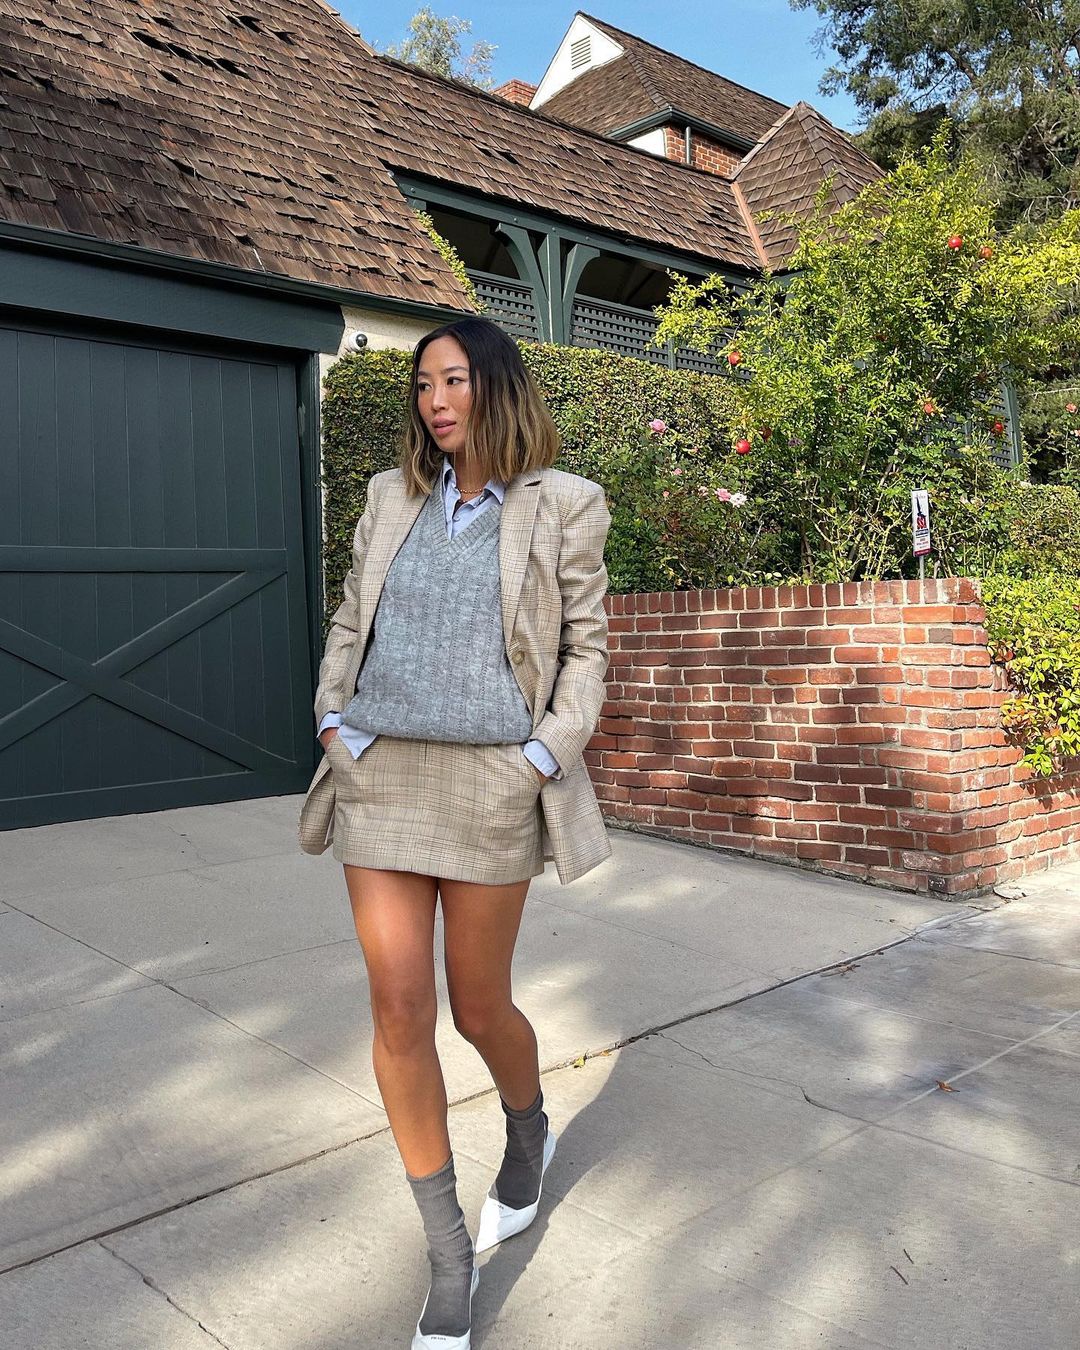 Business casual winter outfits: skirt suit and sweater